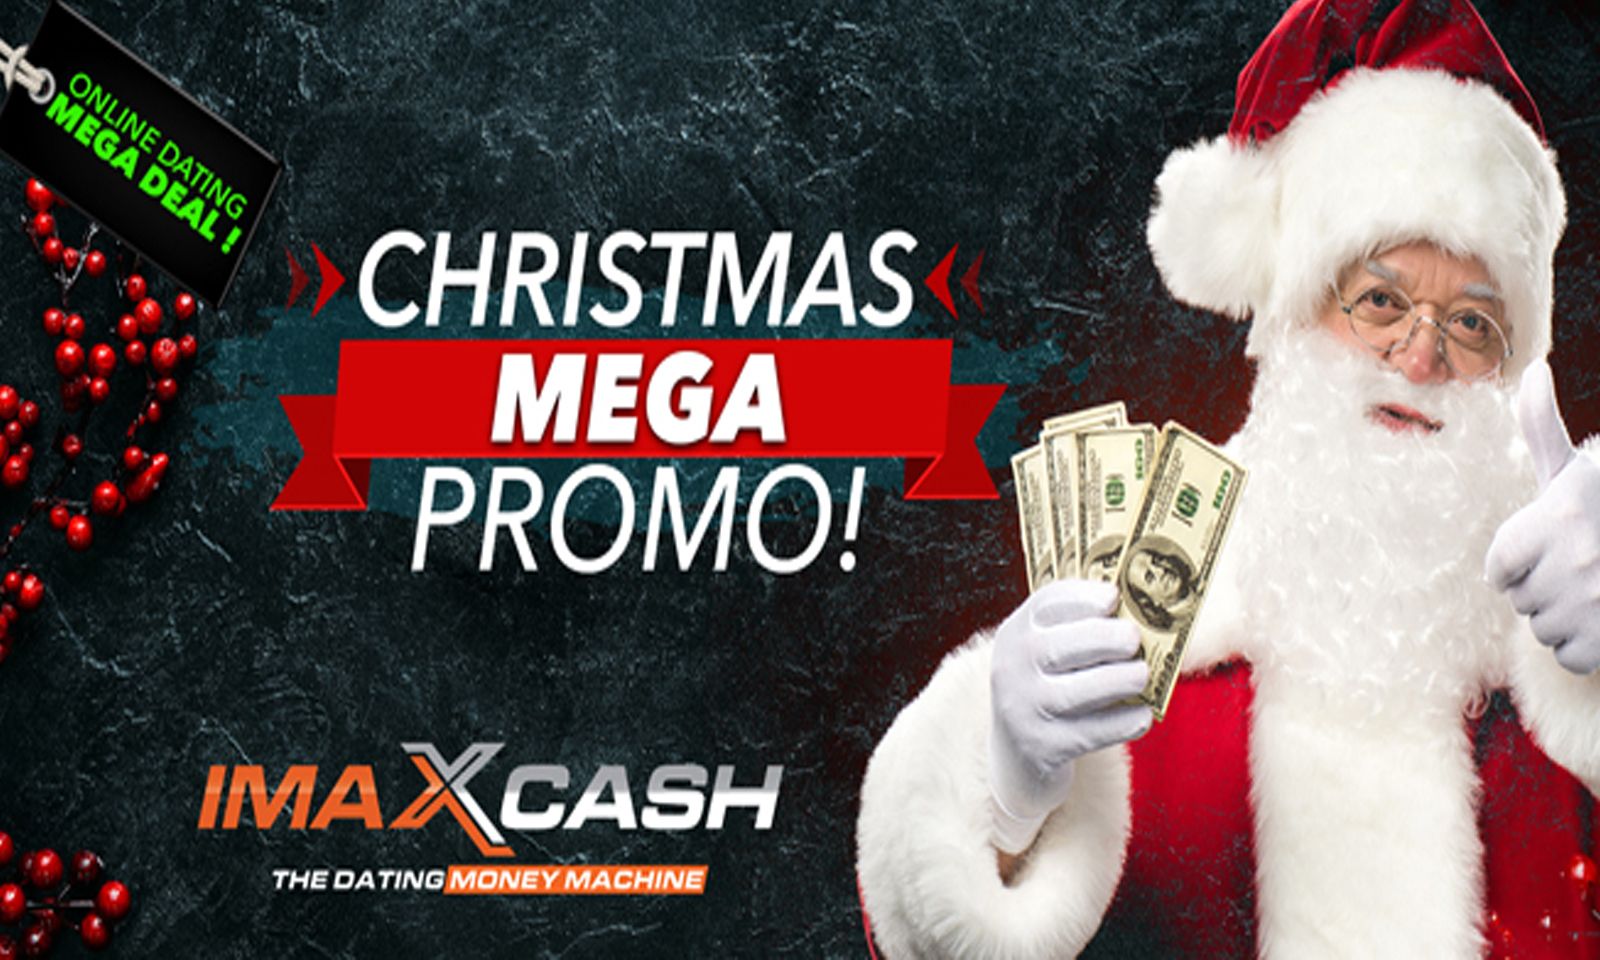 Online Dating Experts imaXcash Announce Christmas Mega Promo